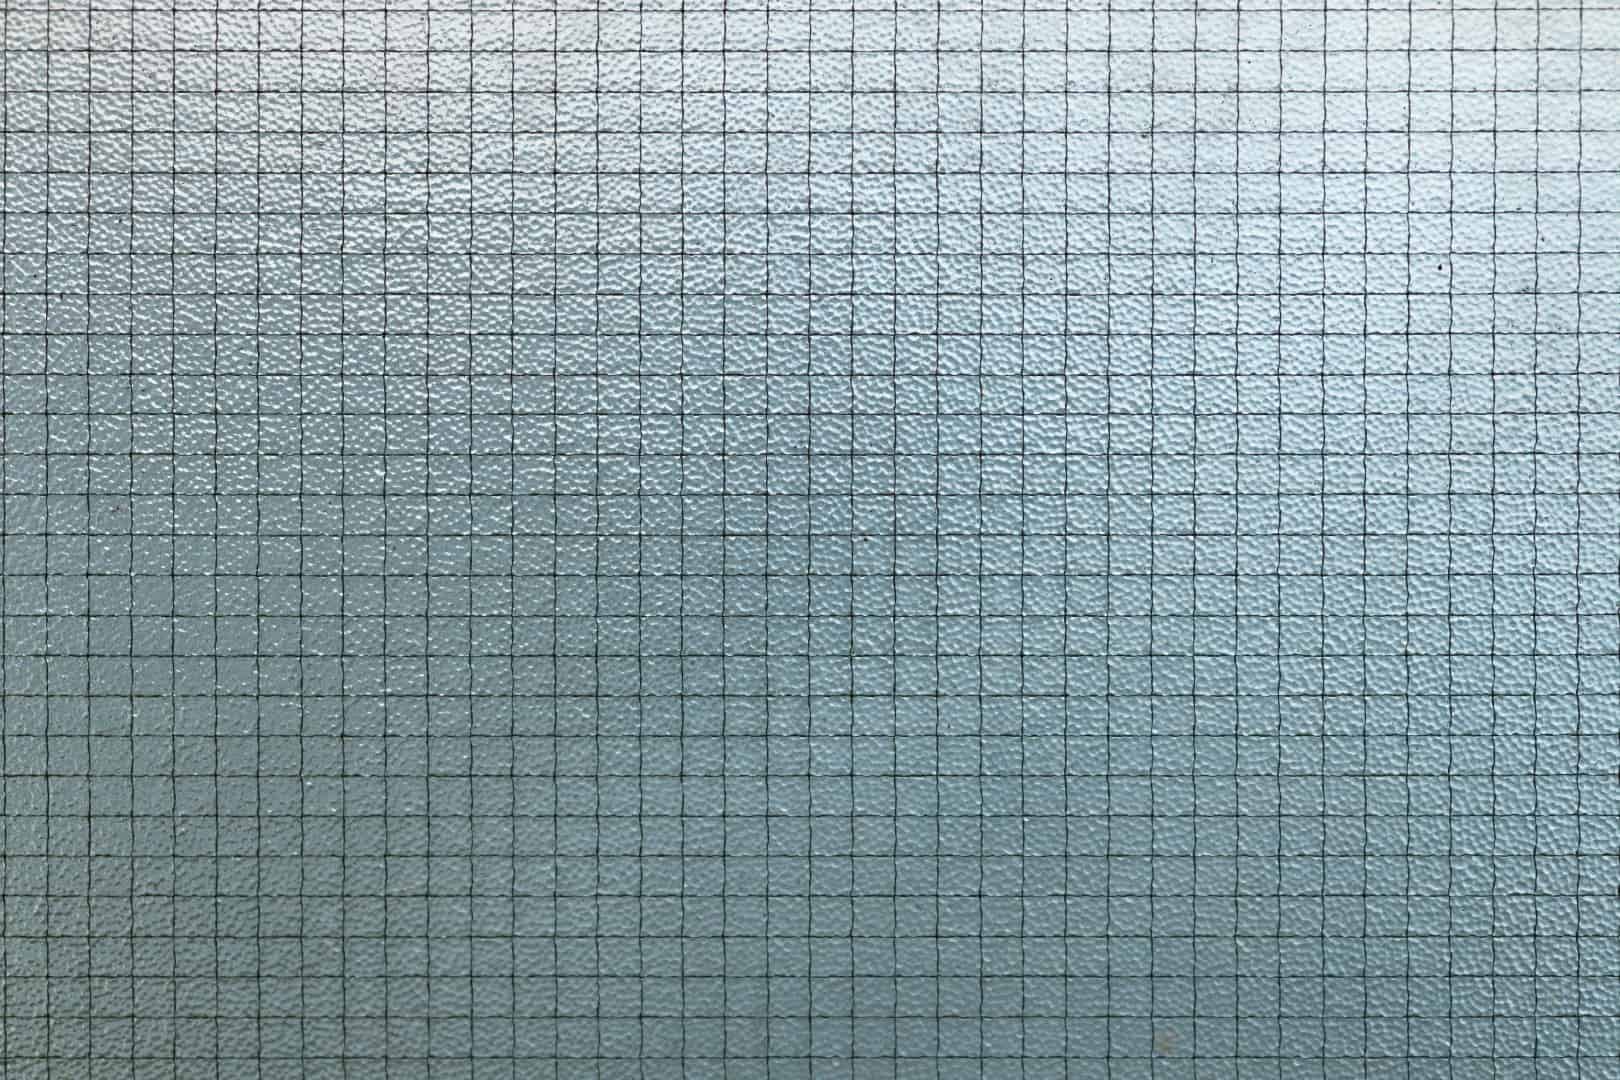 wire mesh glass or protective safetyLarge vitre sur mesure